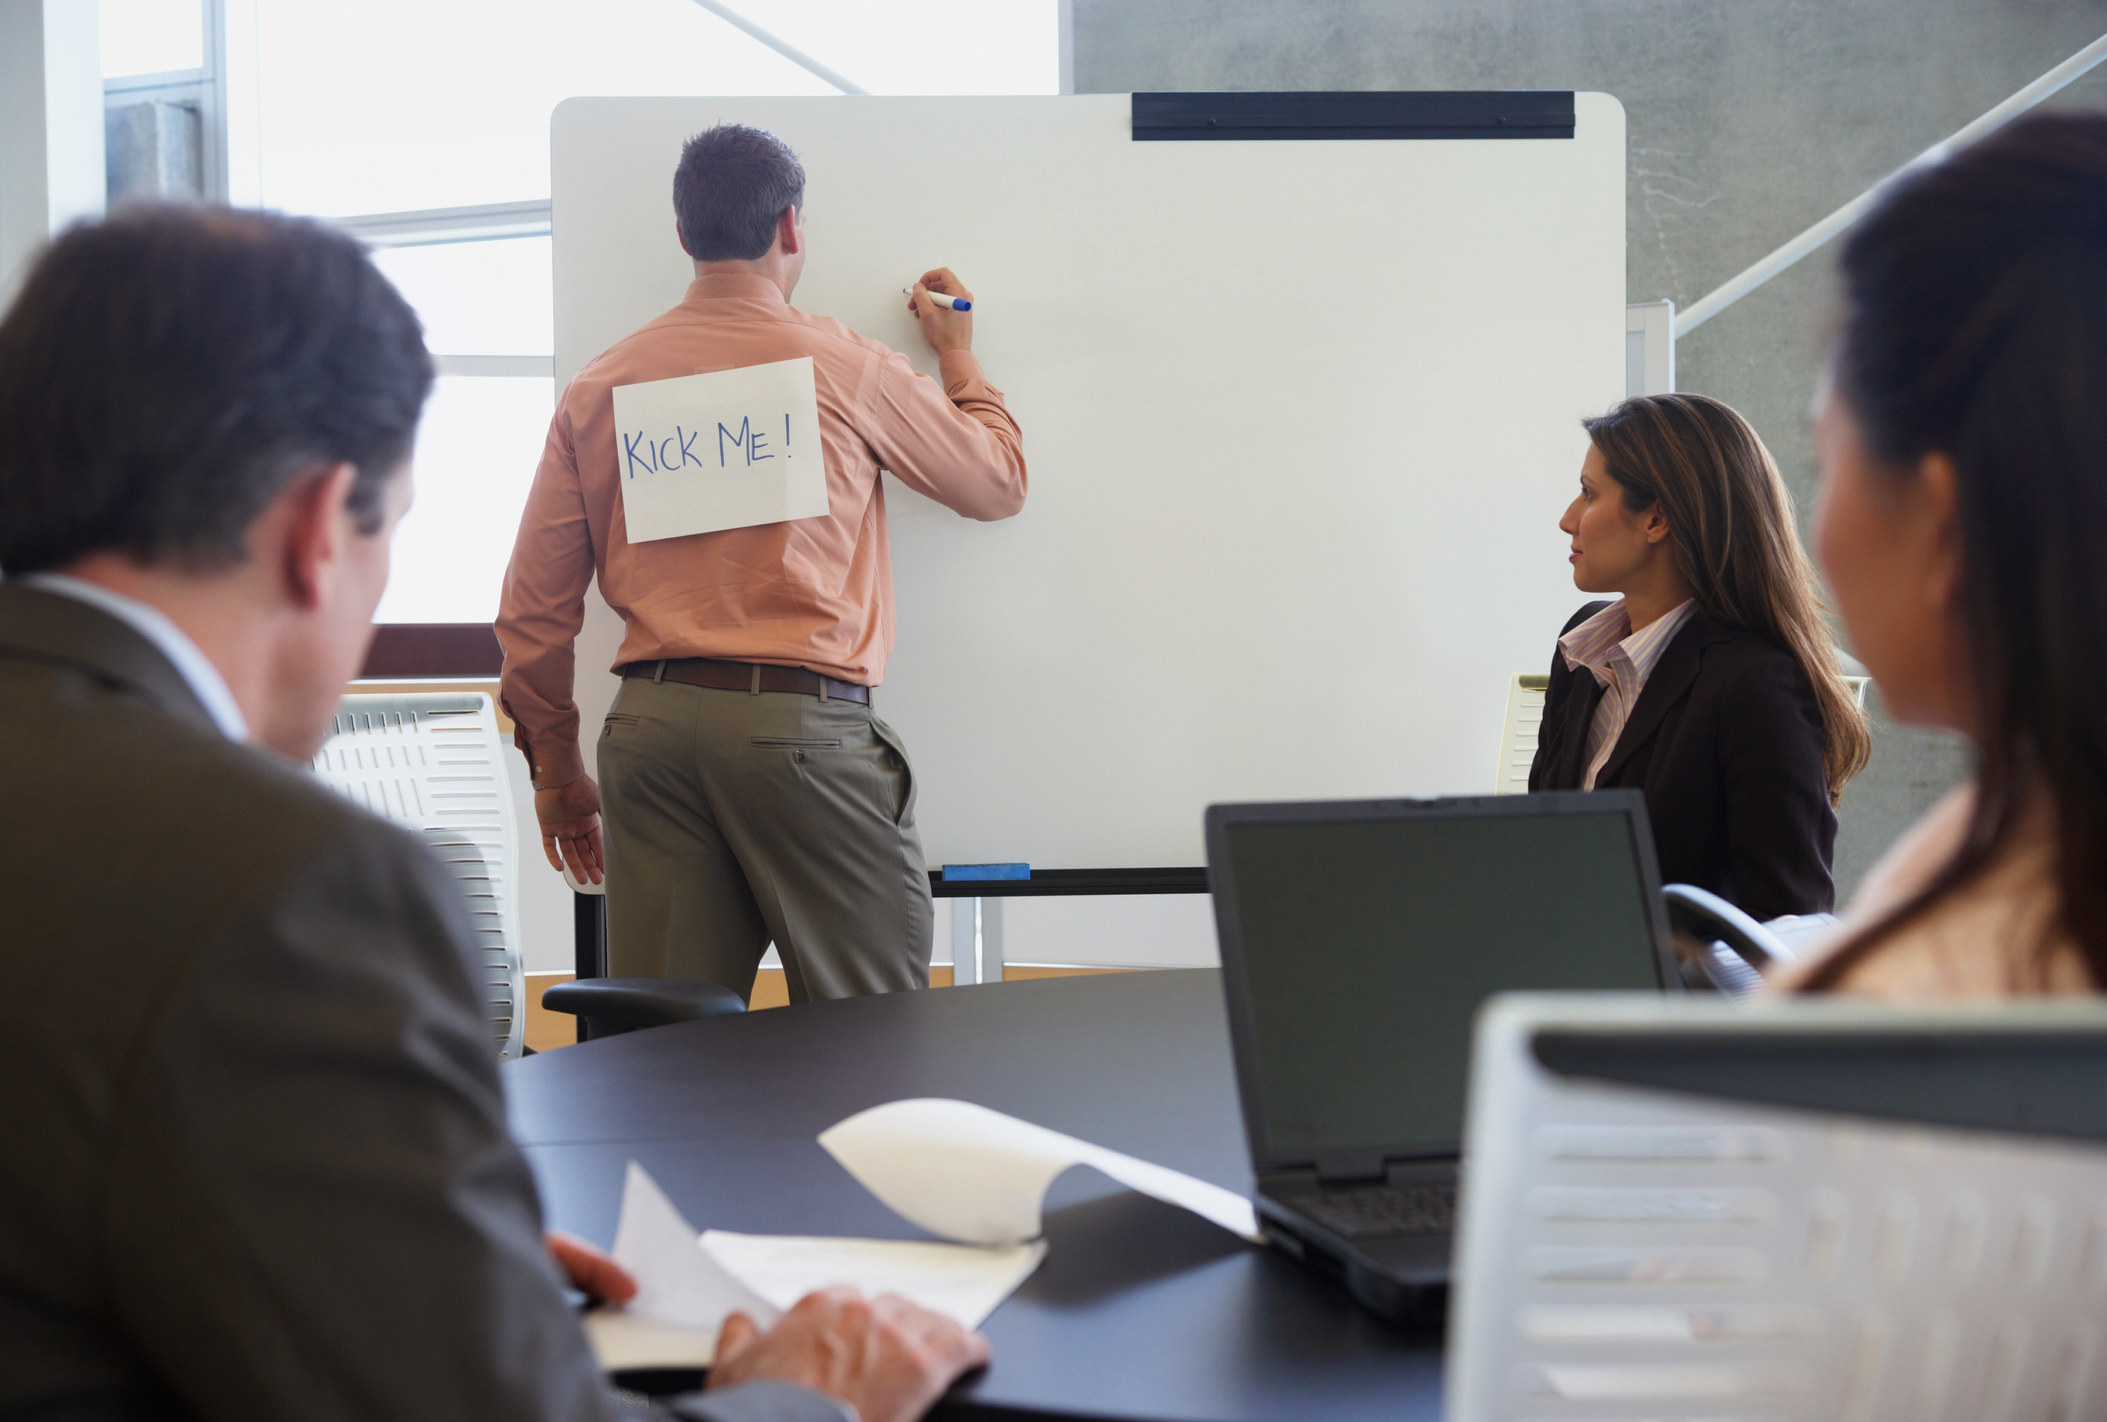 Man at office with a &quot;KICK ME!&quot; sign on his back